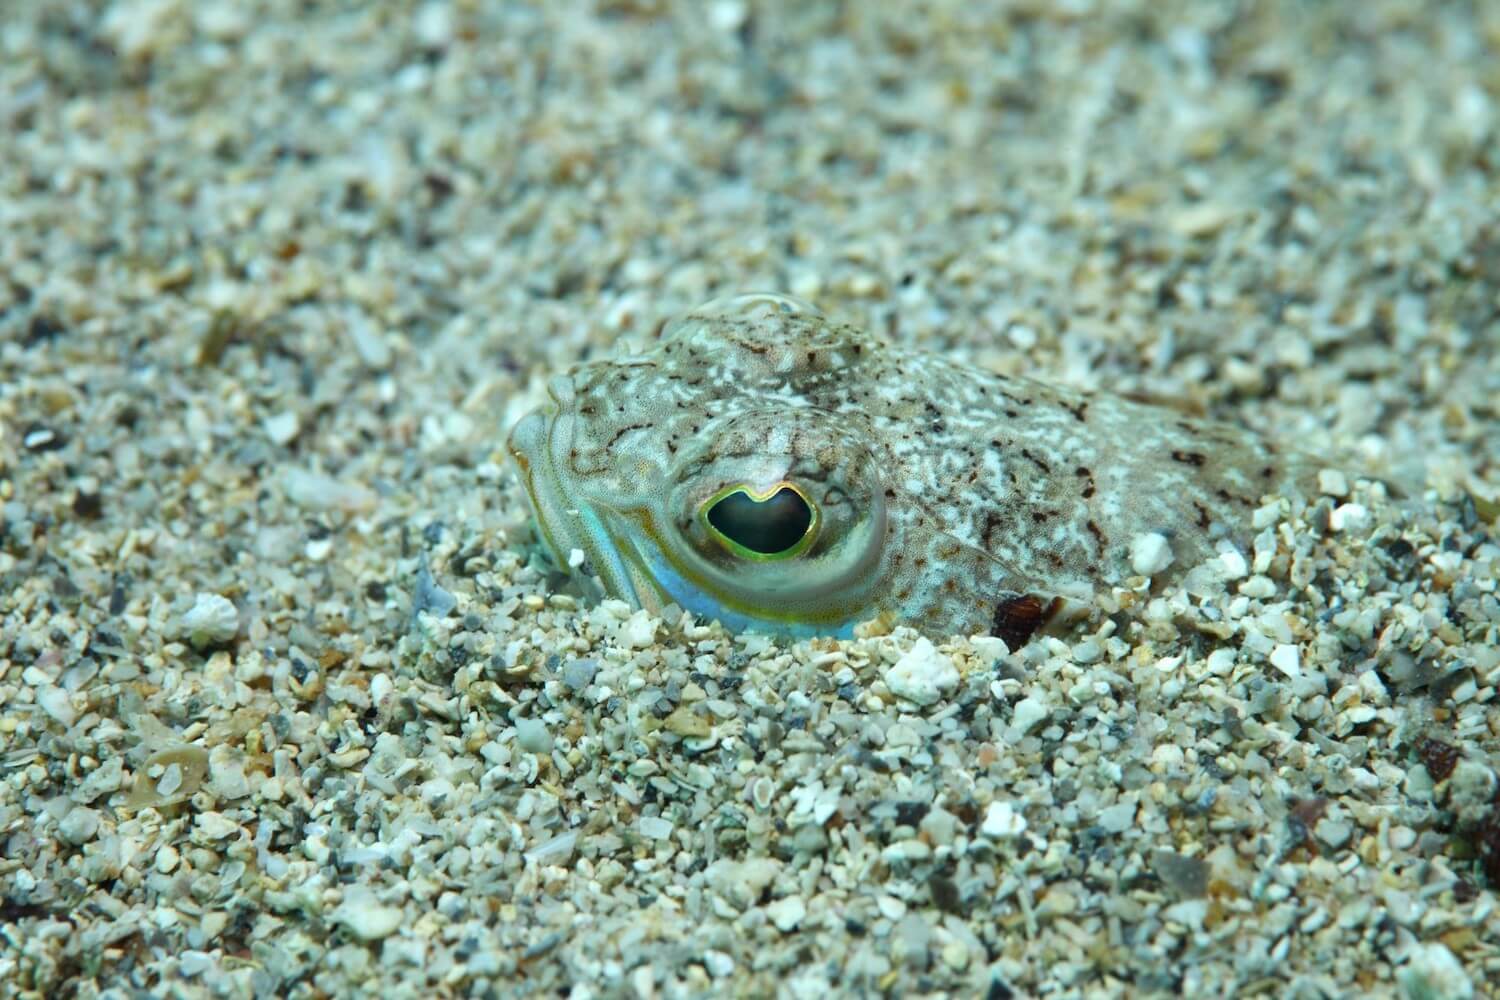 Small fish that looks like sand camoflauged and hidden in the sand